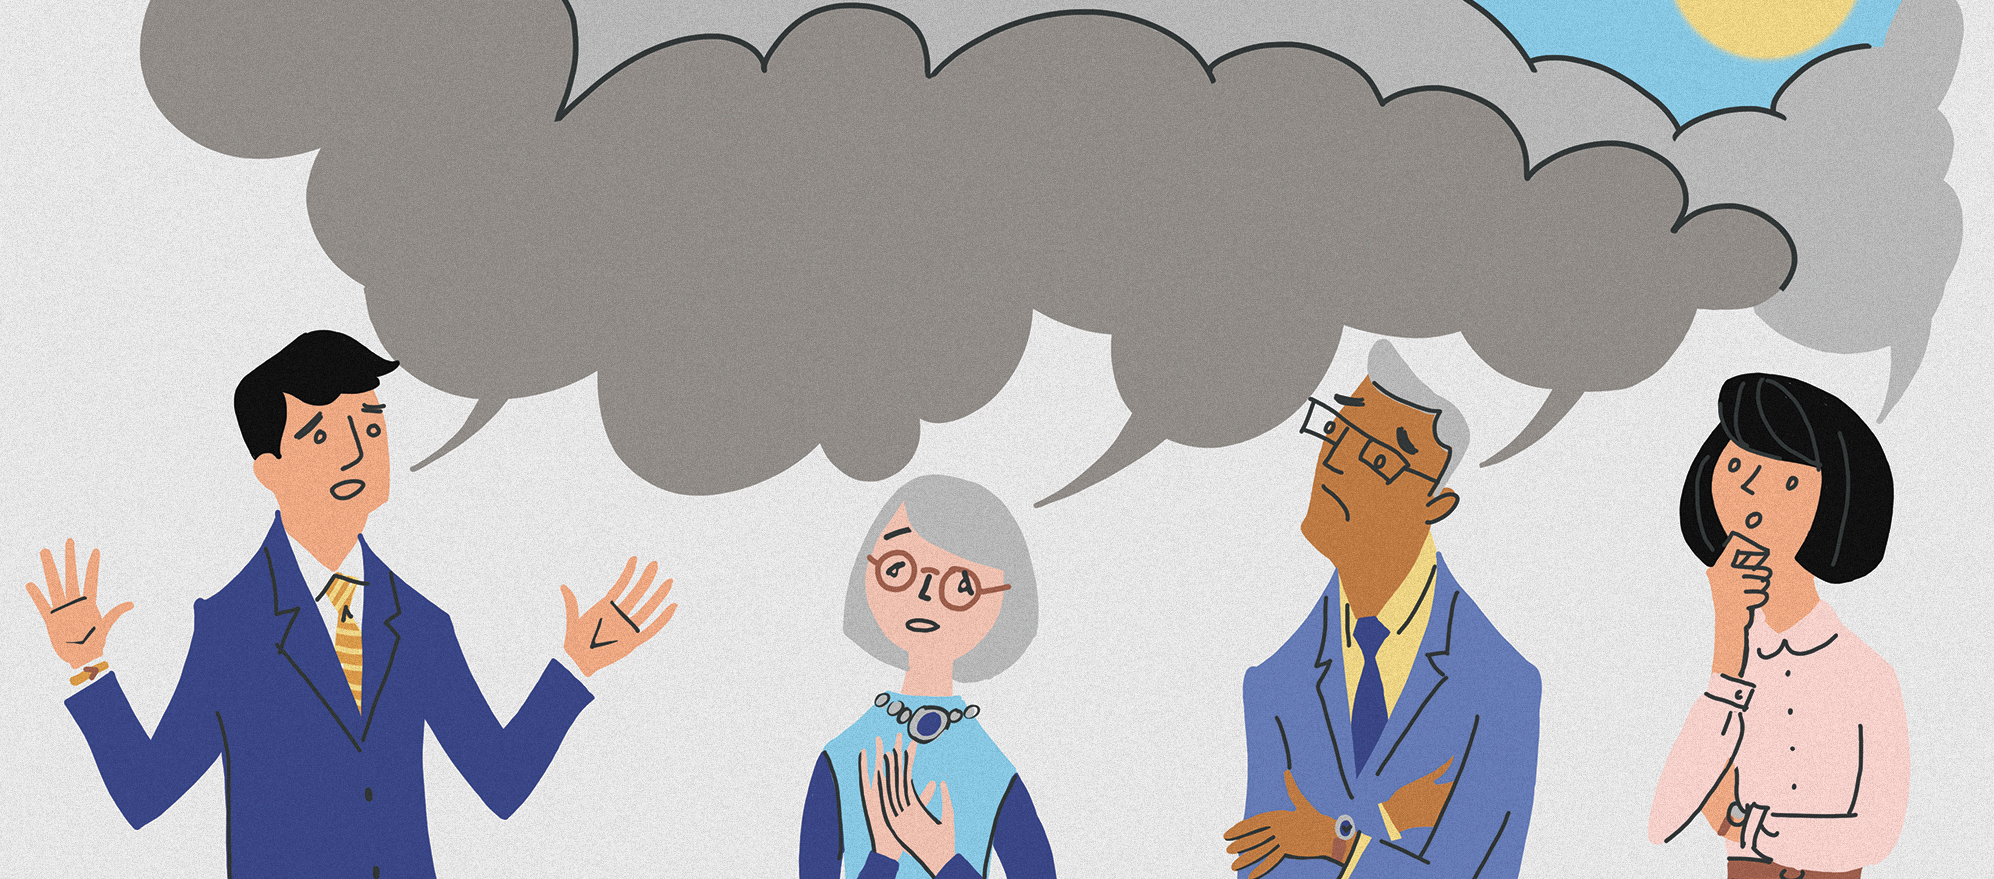 Illustration of a group of coworkers talking with dark cloud speech bubbles above them